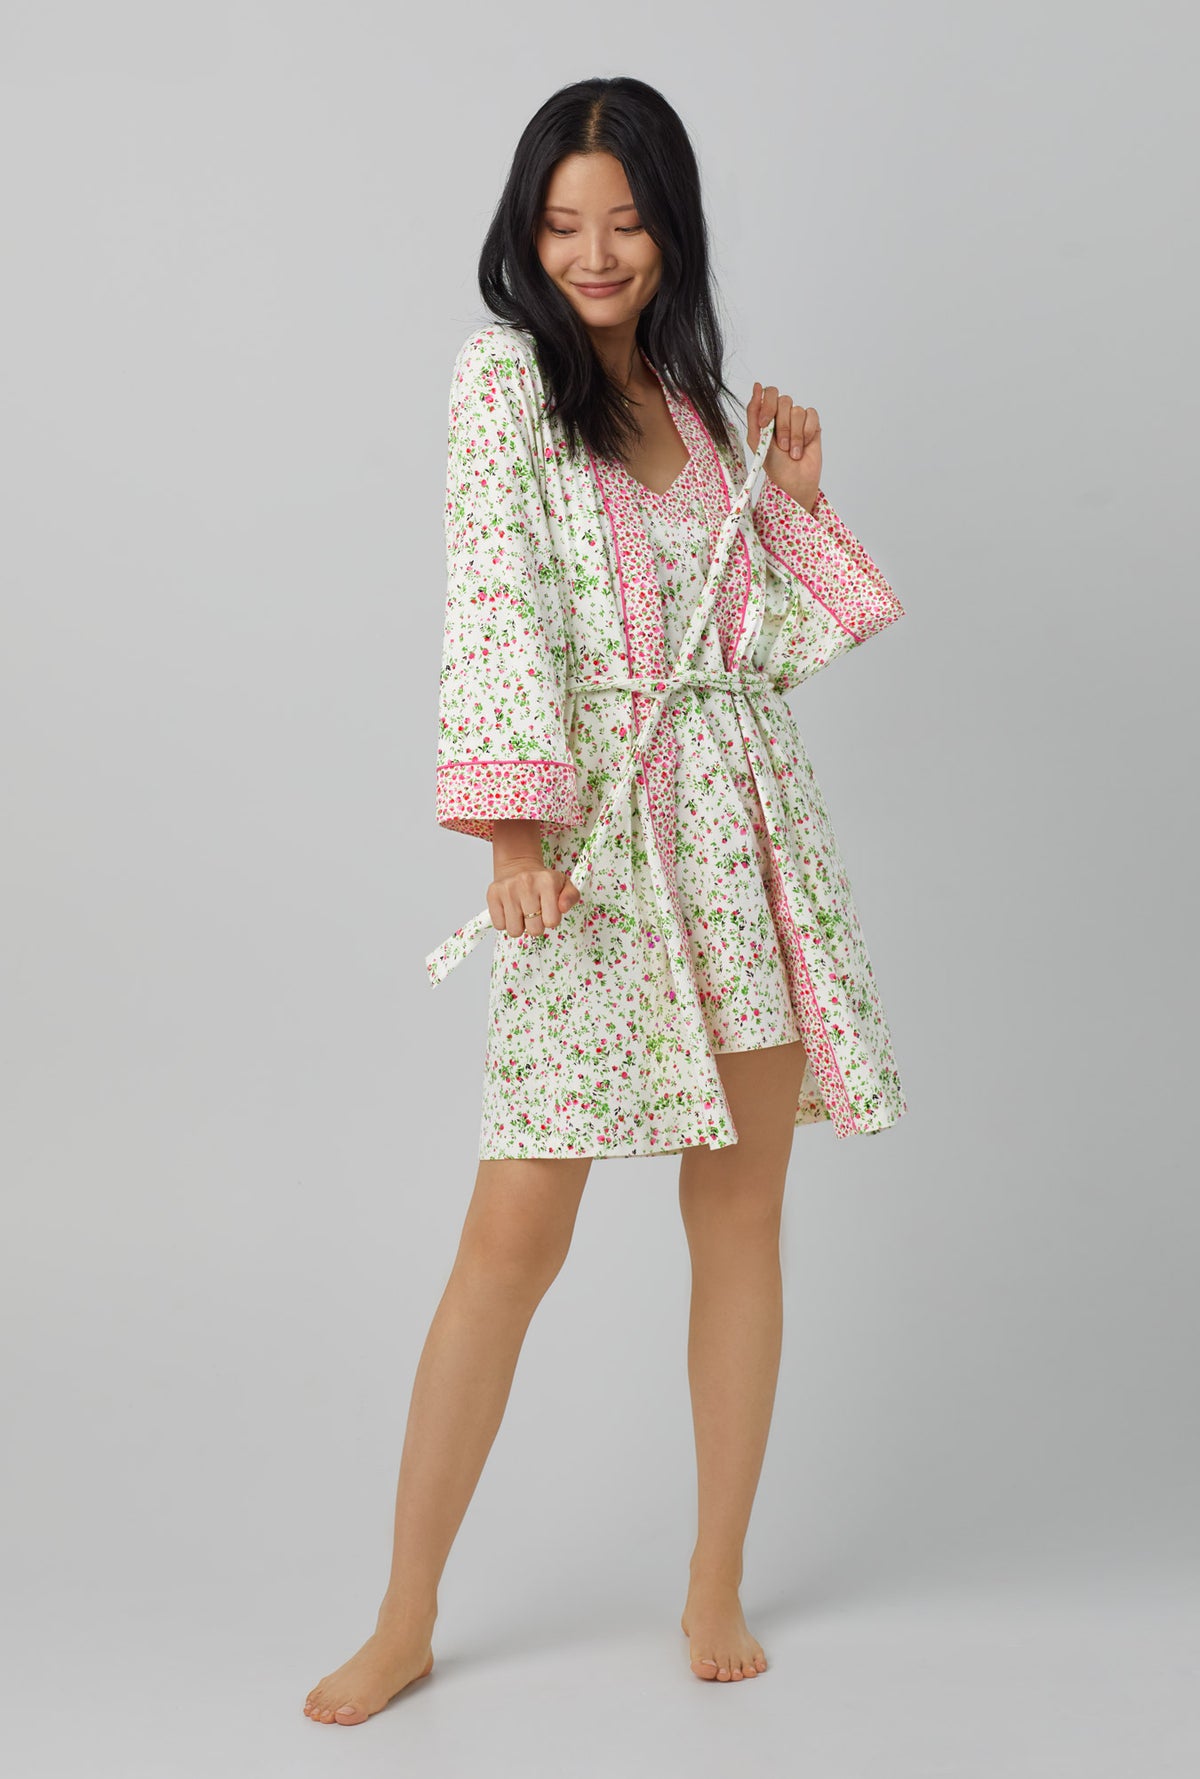 A lady wearing white Collar Stretch Jersey Robe with Nellie print